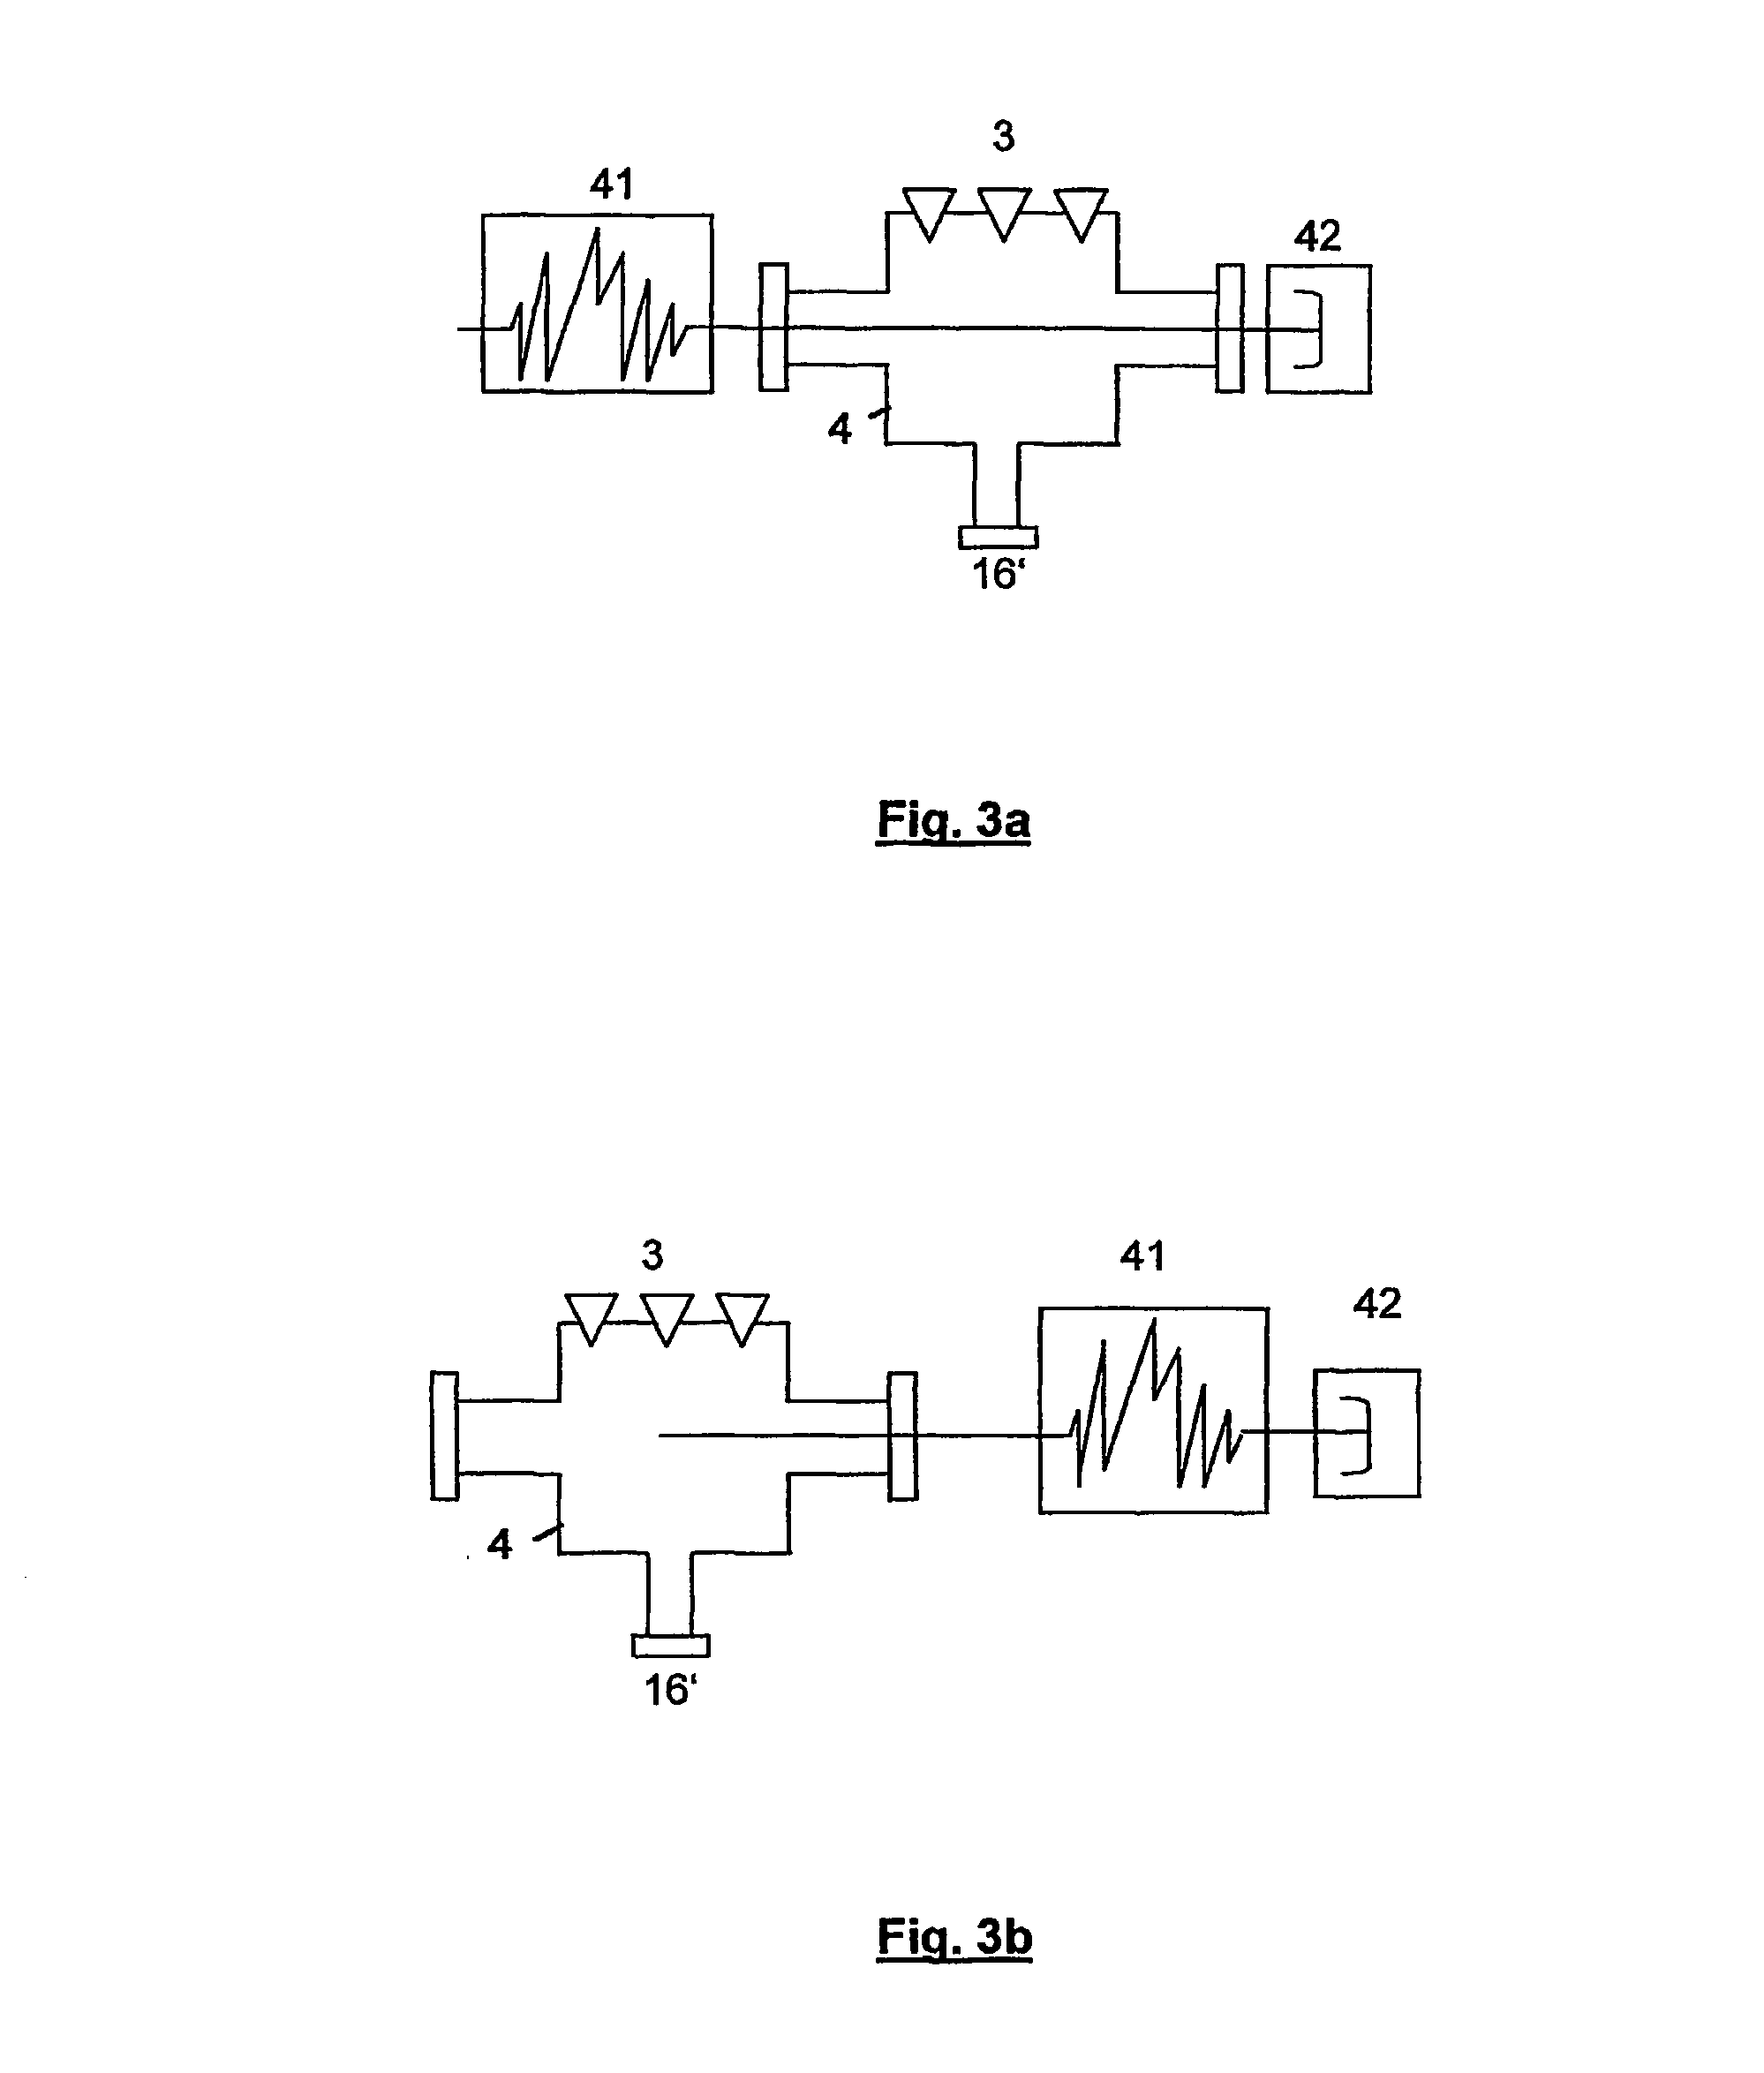 Method and device for depositing at least one precursor, which is in liquid or dissolved form, on at least one substrate